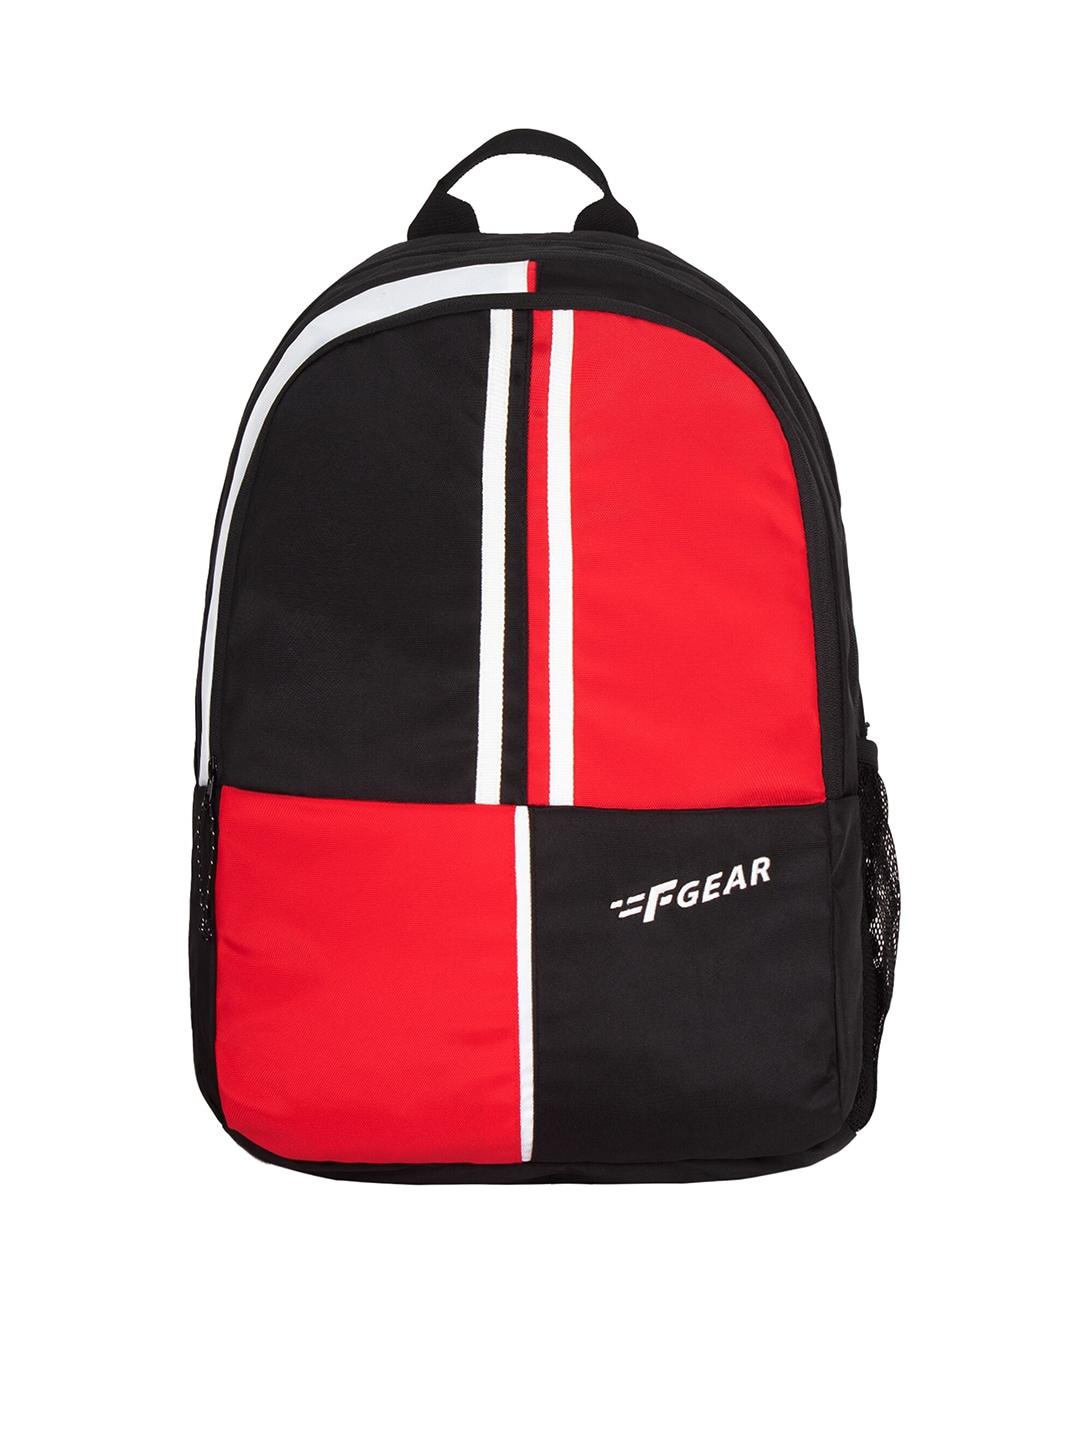 f gear unisex colourblocked water resistant laptop backpack